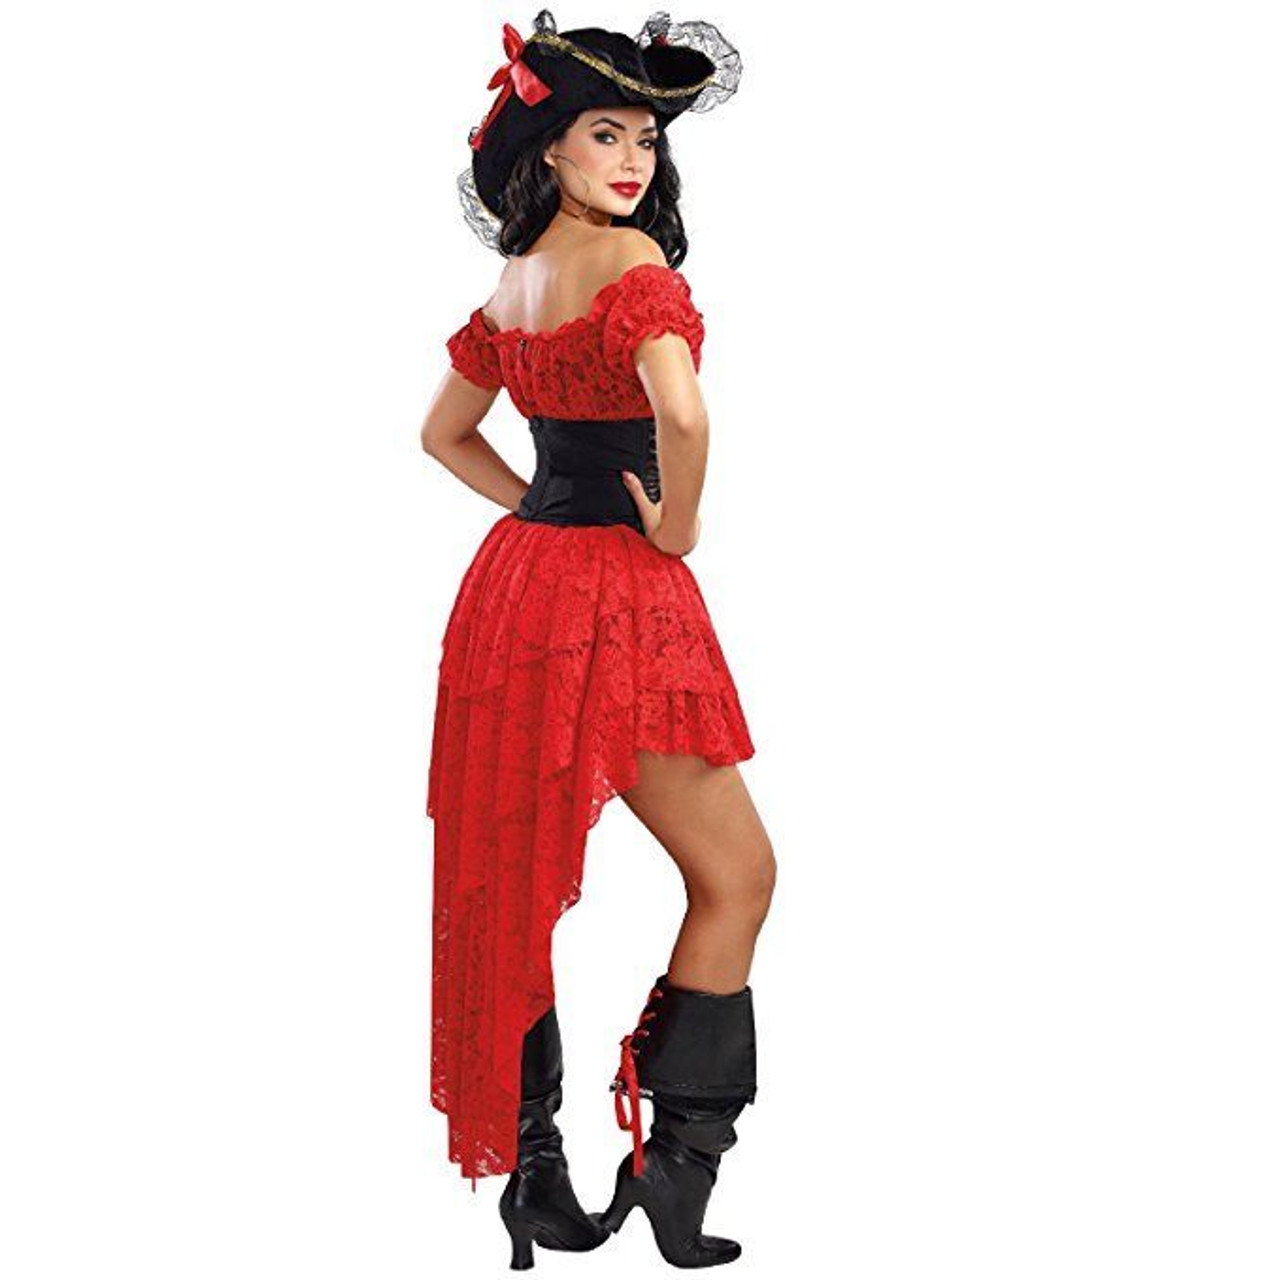 Dreamgirl Pirate Wench Sea Treasure Adult Womens Halloween Costume 10661 Fearless Apparel 0983